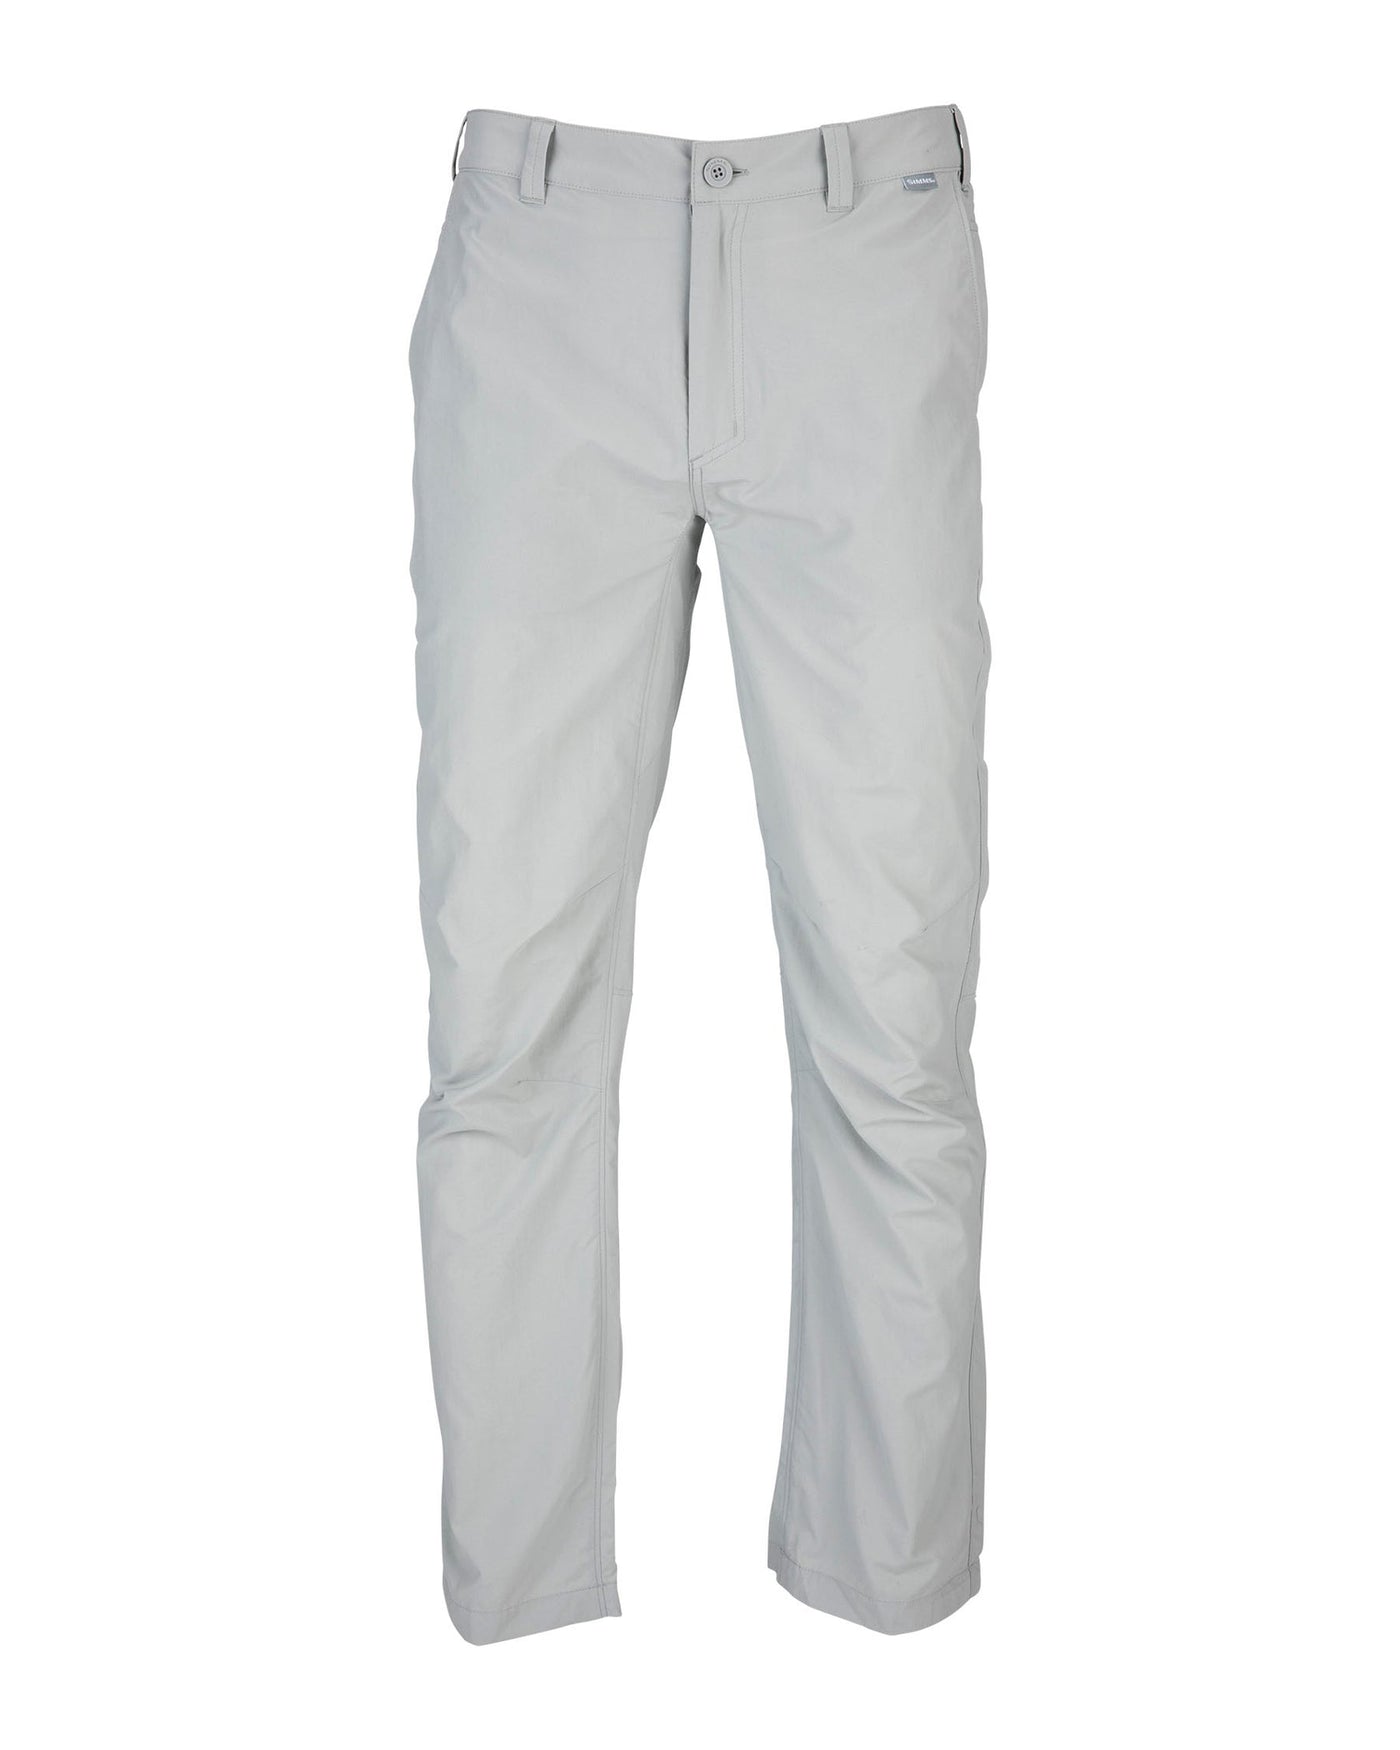 Simms M's Superlight Pant (Discontinued)